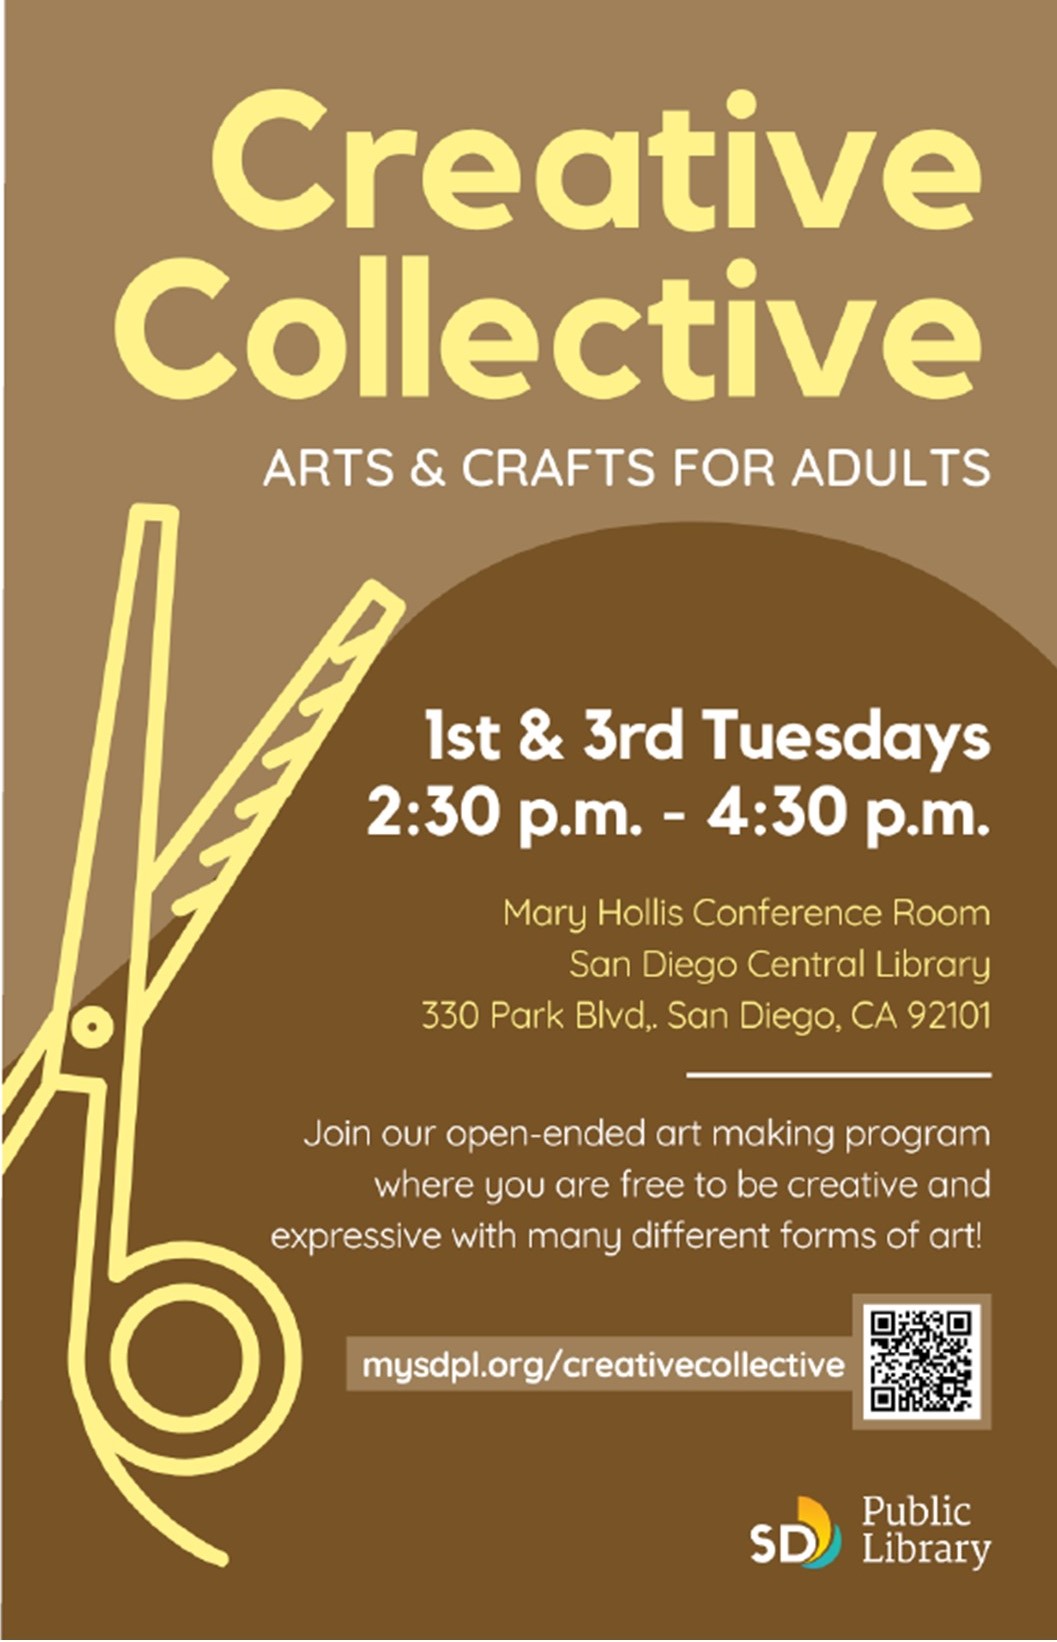 Creative Collective flyer with dates and times